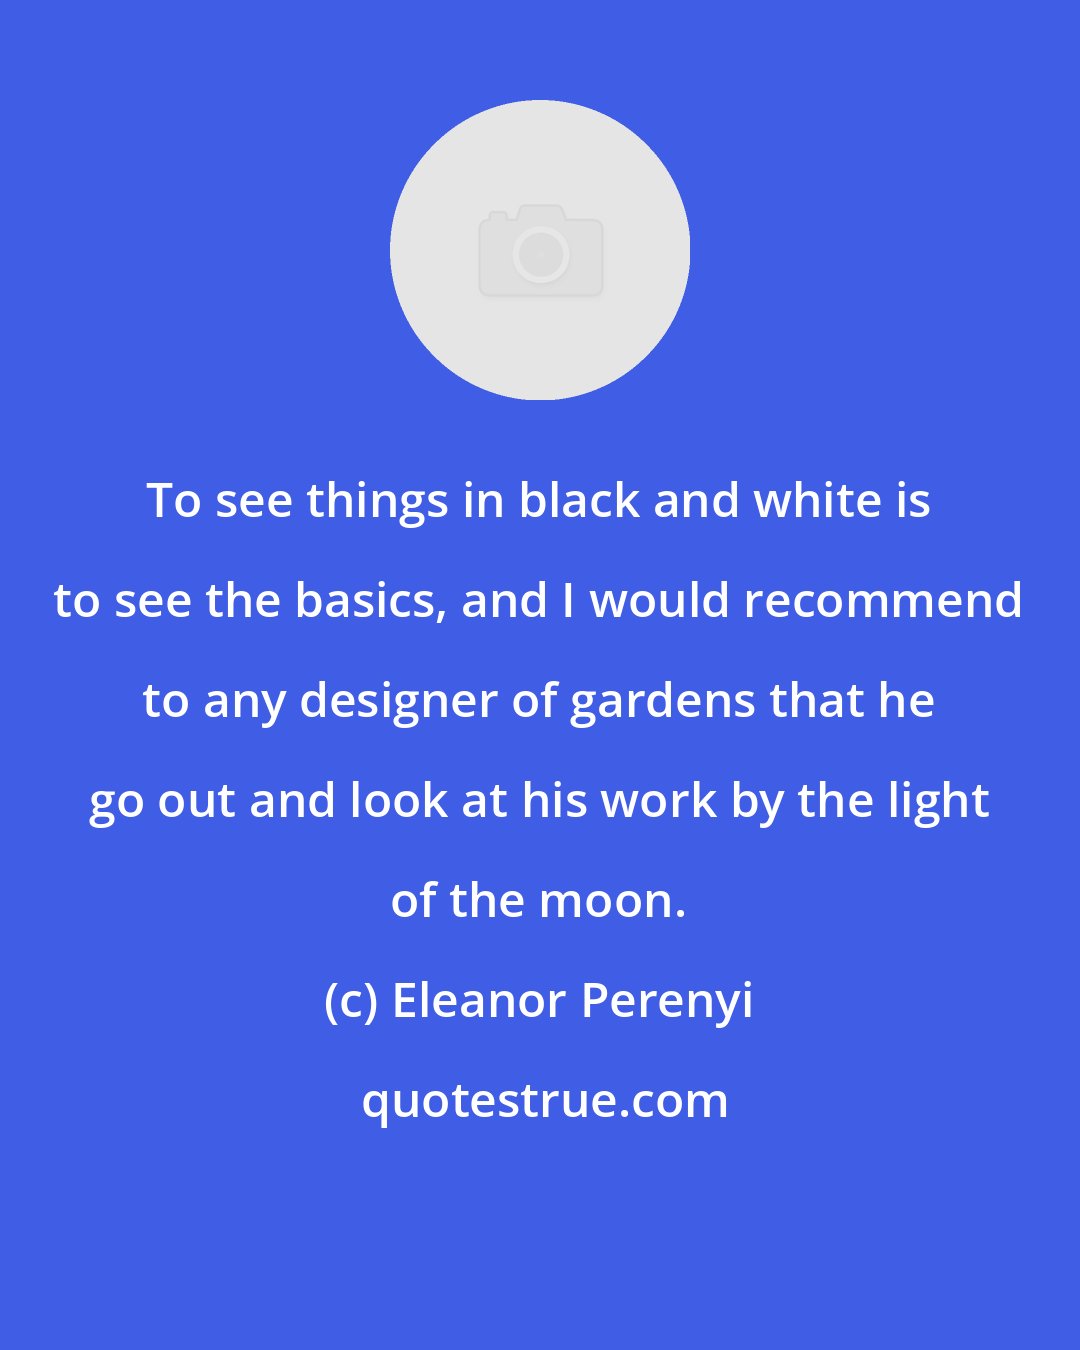 Eleanor Perenyi: To see things in black and white is to see the basics, and I would recommend to any designer of gardens that he go out and look at his work by the light of the moon.